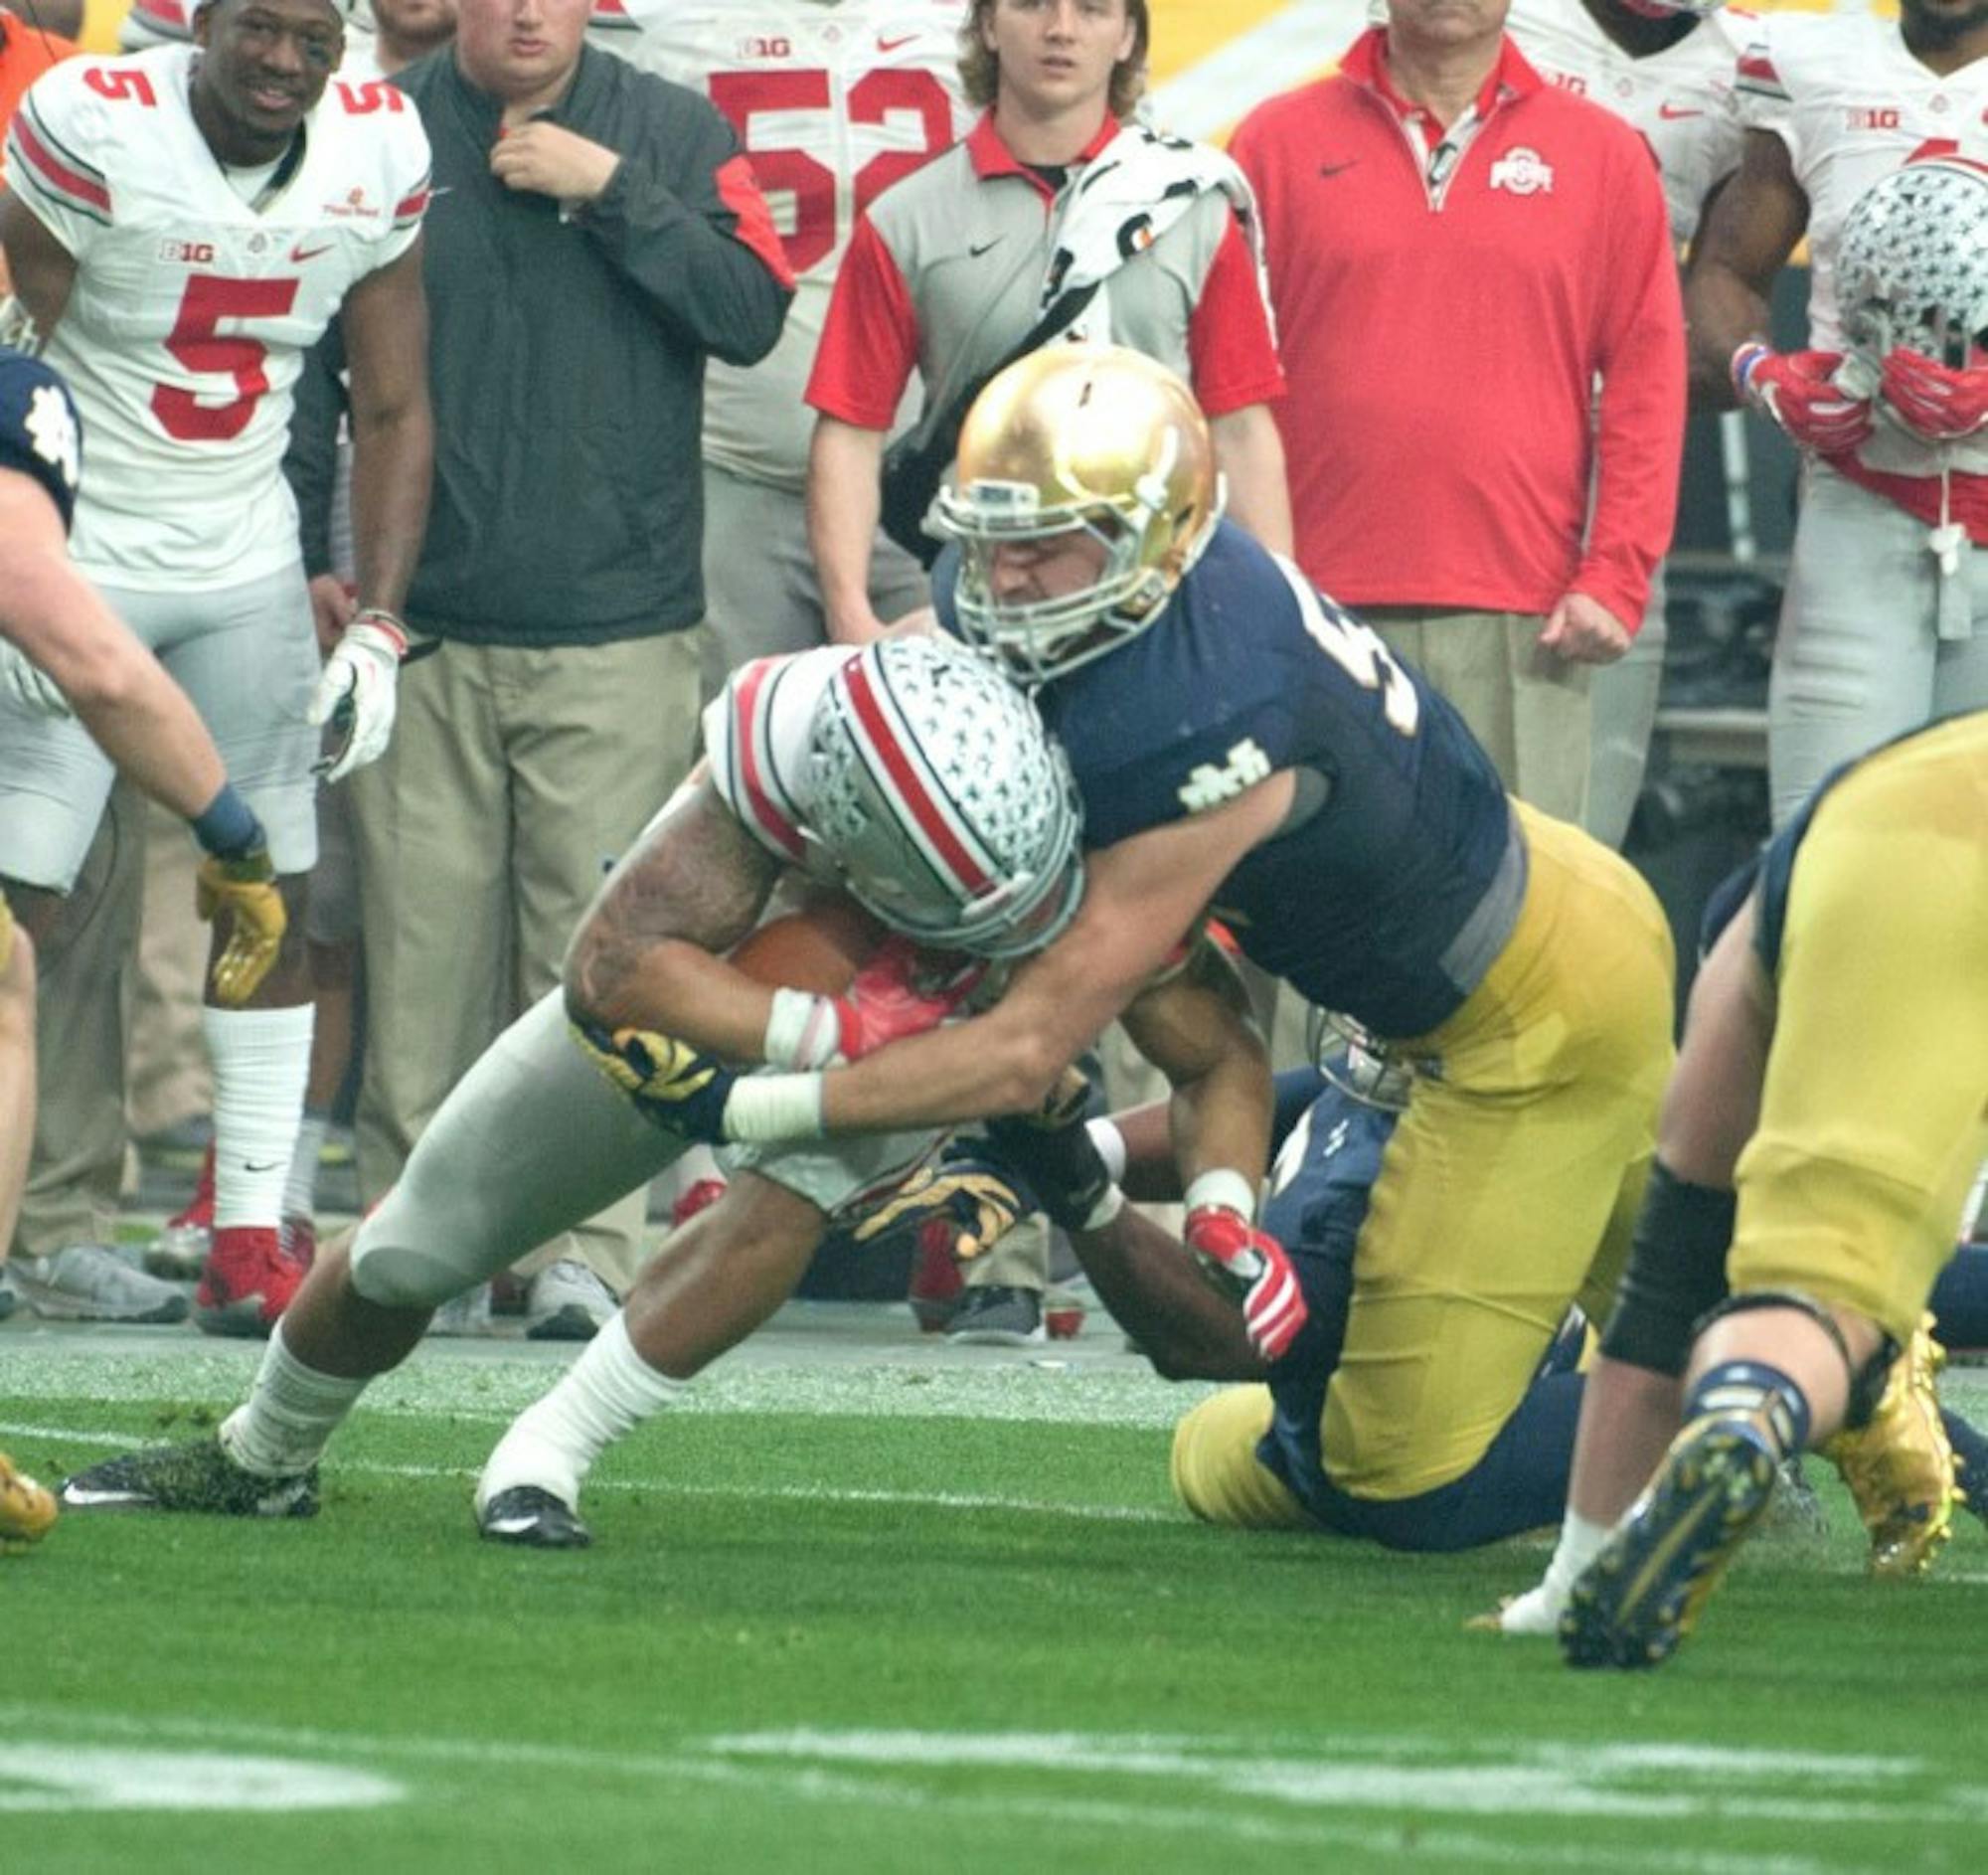 Irish graduate student linebacker Jarrett Grace wraps up Buckeyes junior running back Ezekiel Elliott during Notre Dame's loss to Ohio State on Friday. Grace entered the game after junior Jaylon Smith and freshman Te'von Coney both suffered injuries and finished with nine tackles.